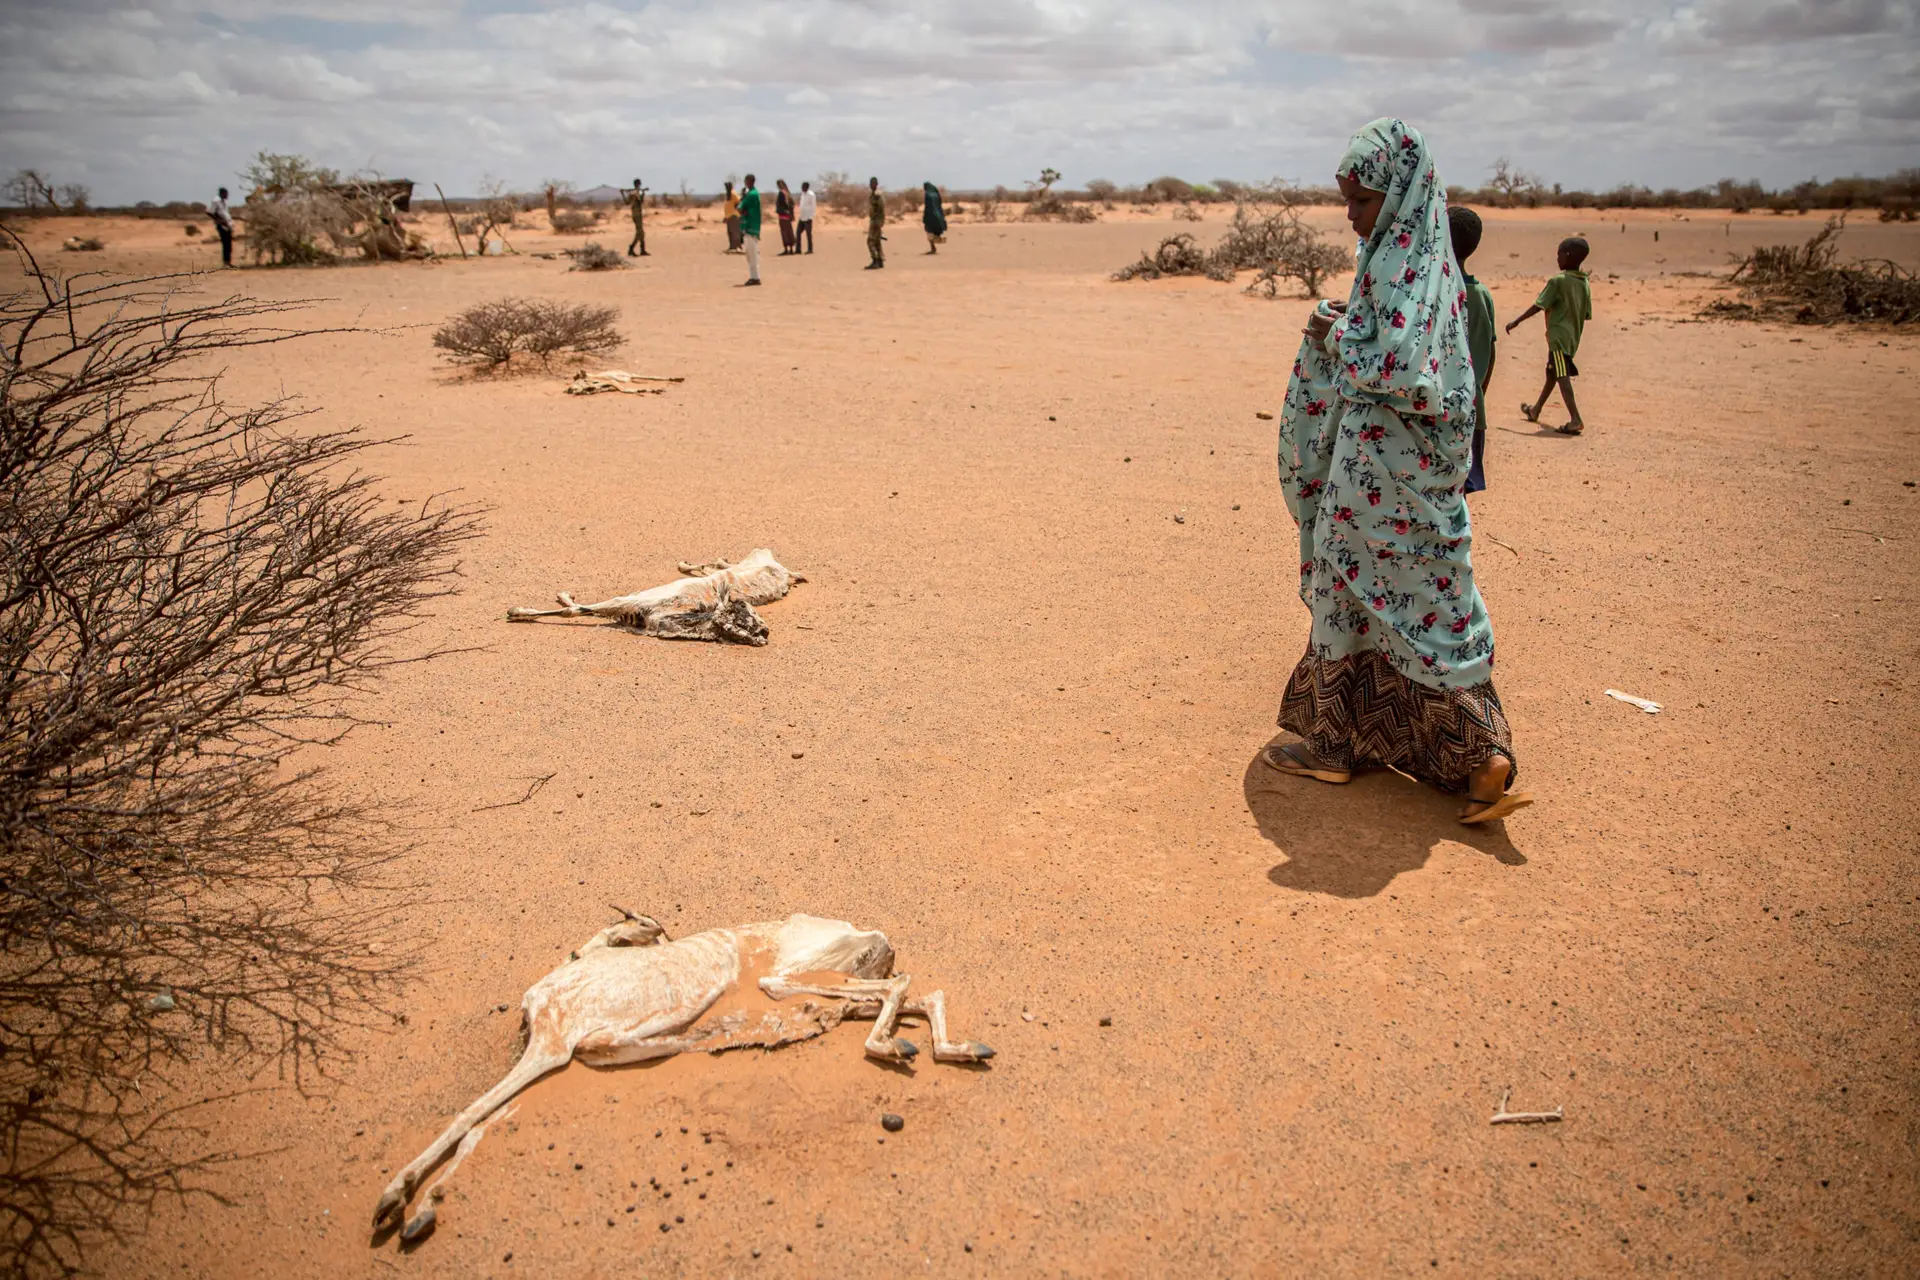 DOLLOW, JUBALAND, SOMALIA – 2022/04/14: A child displaced by drought holds her nose as she walks past the rotting carcasses of goats that died from hunger and thirst on the outskirts of Dollow, Somalia. People from across Gedo in Somalia have been displaced due to drought conditions and forced to come to Dollow, in the southwest, to search for aid. Somalia has suffered three failed rainy seasons in a row, making this the worst drought in decades, and 6 million people are in crisis levels of food insecurity. The problems are being compounded by the rising costs of food prices because of the Ukraine war. Hence, hundreds of thousands of livestock have died from hunger and thirst. (Photo by Sally Hayden/SOPA Images/LightRocket via Getty Images)